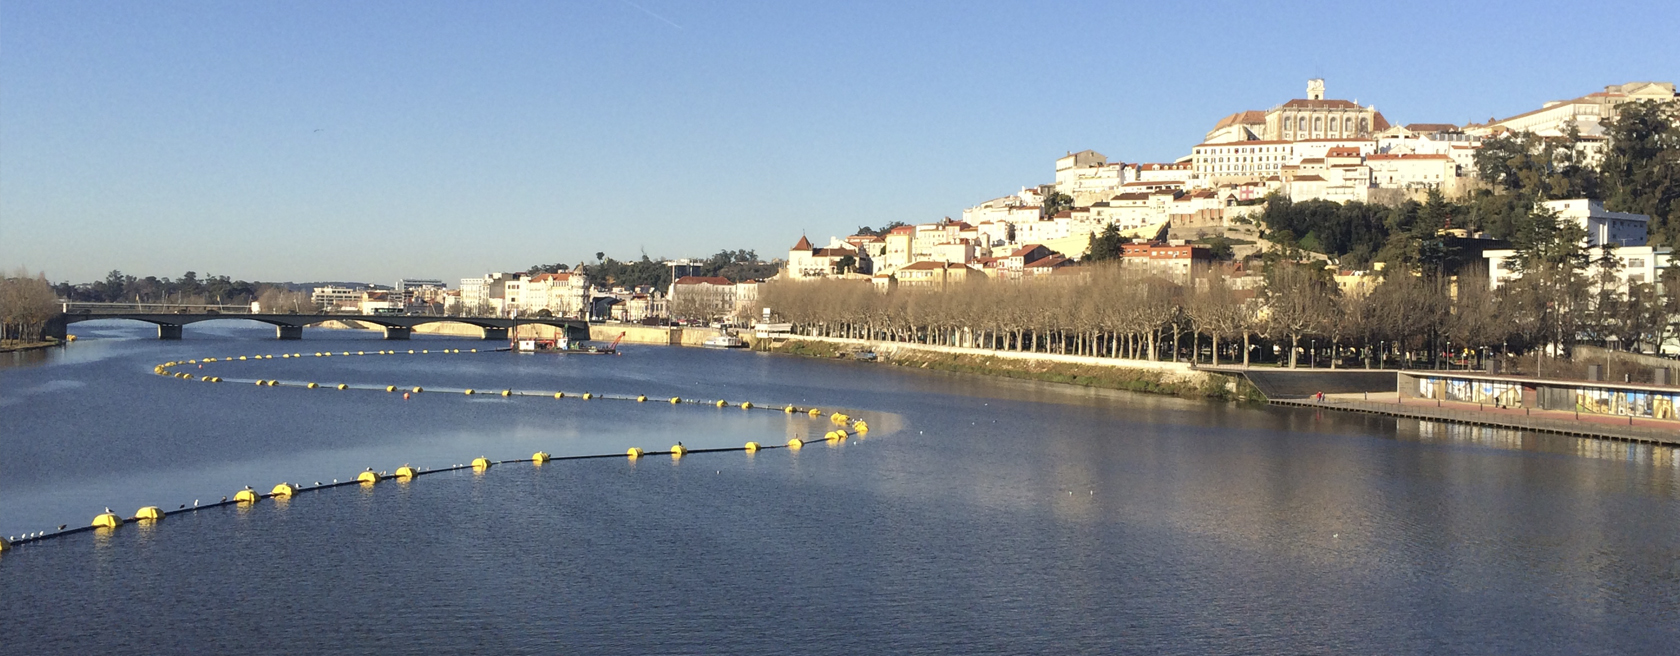 Sand Removal of Coimbra Bay and Bridge and Stabilization of the Mondego River Right Bank